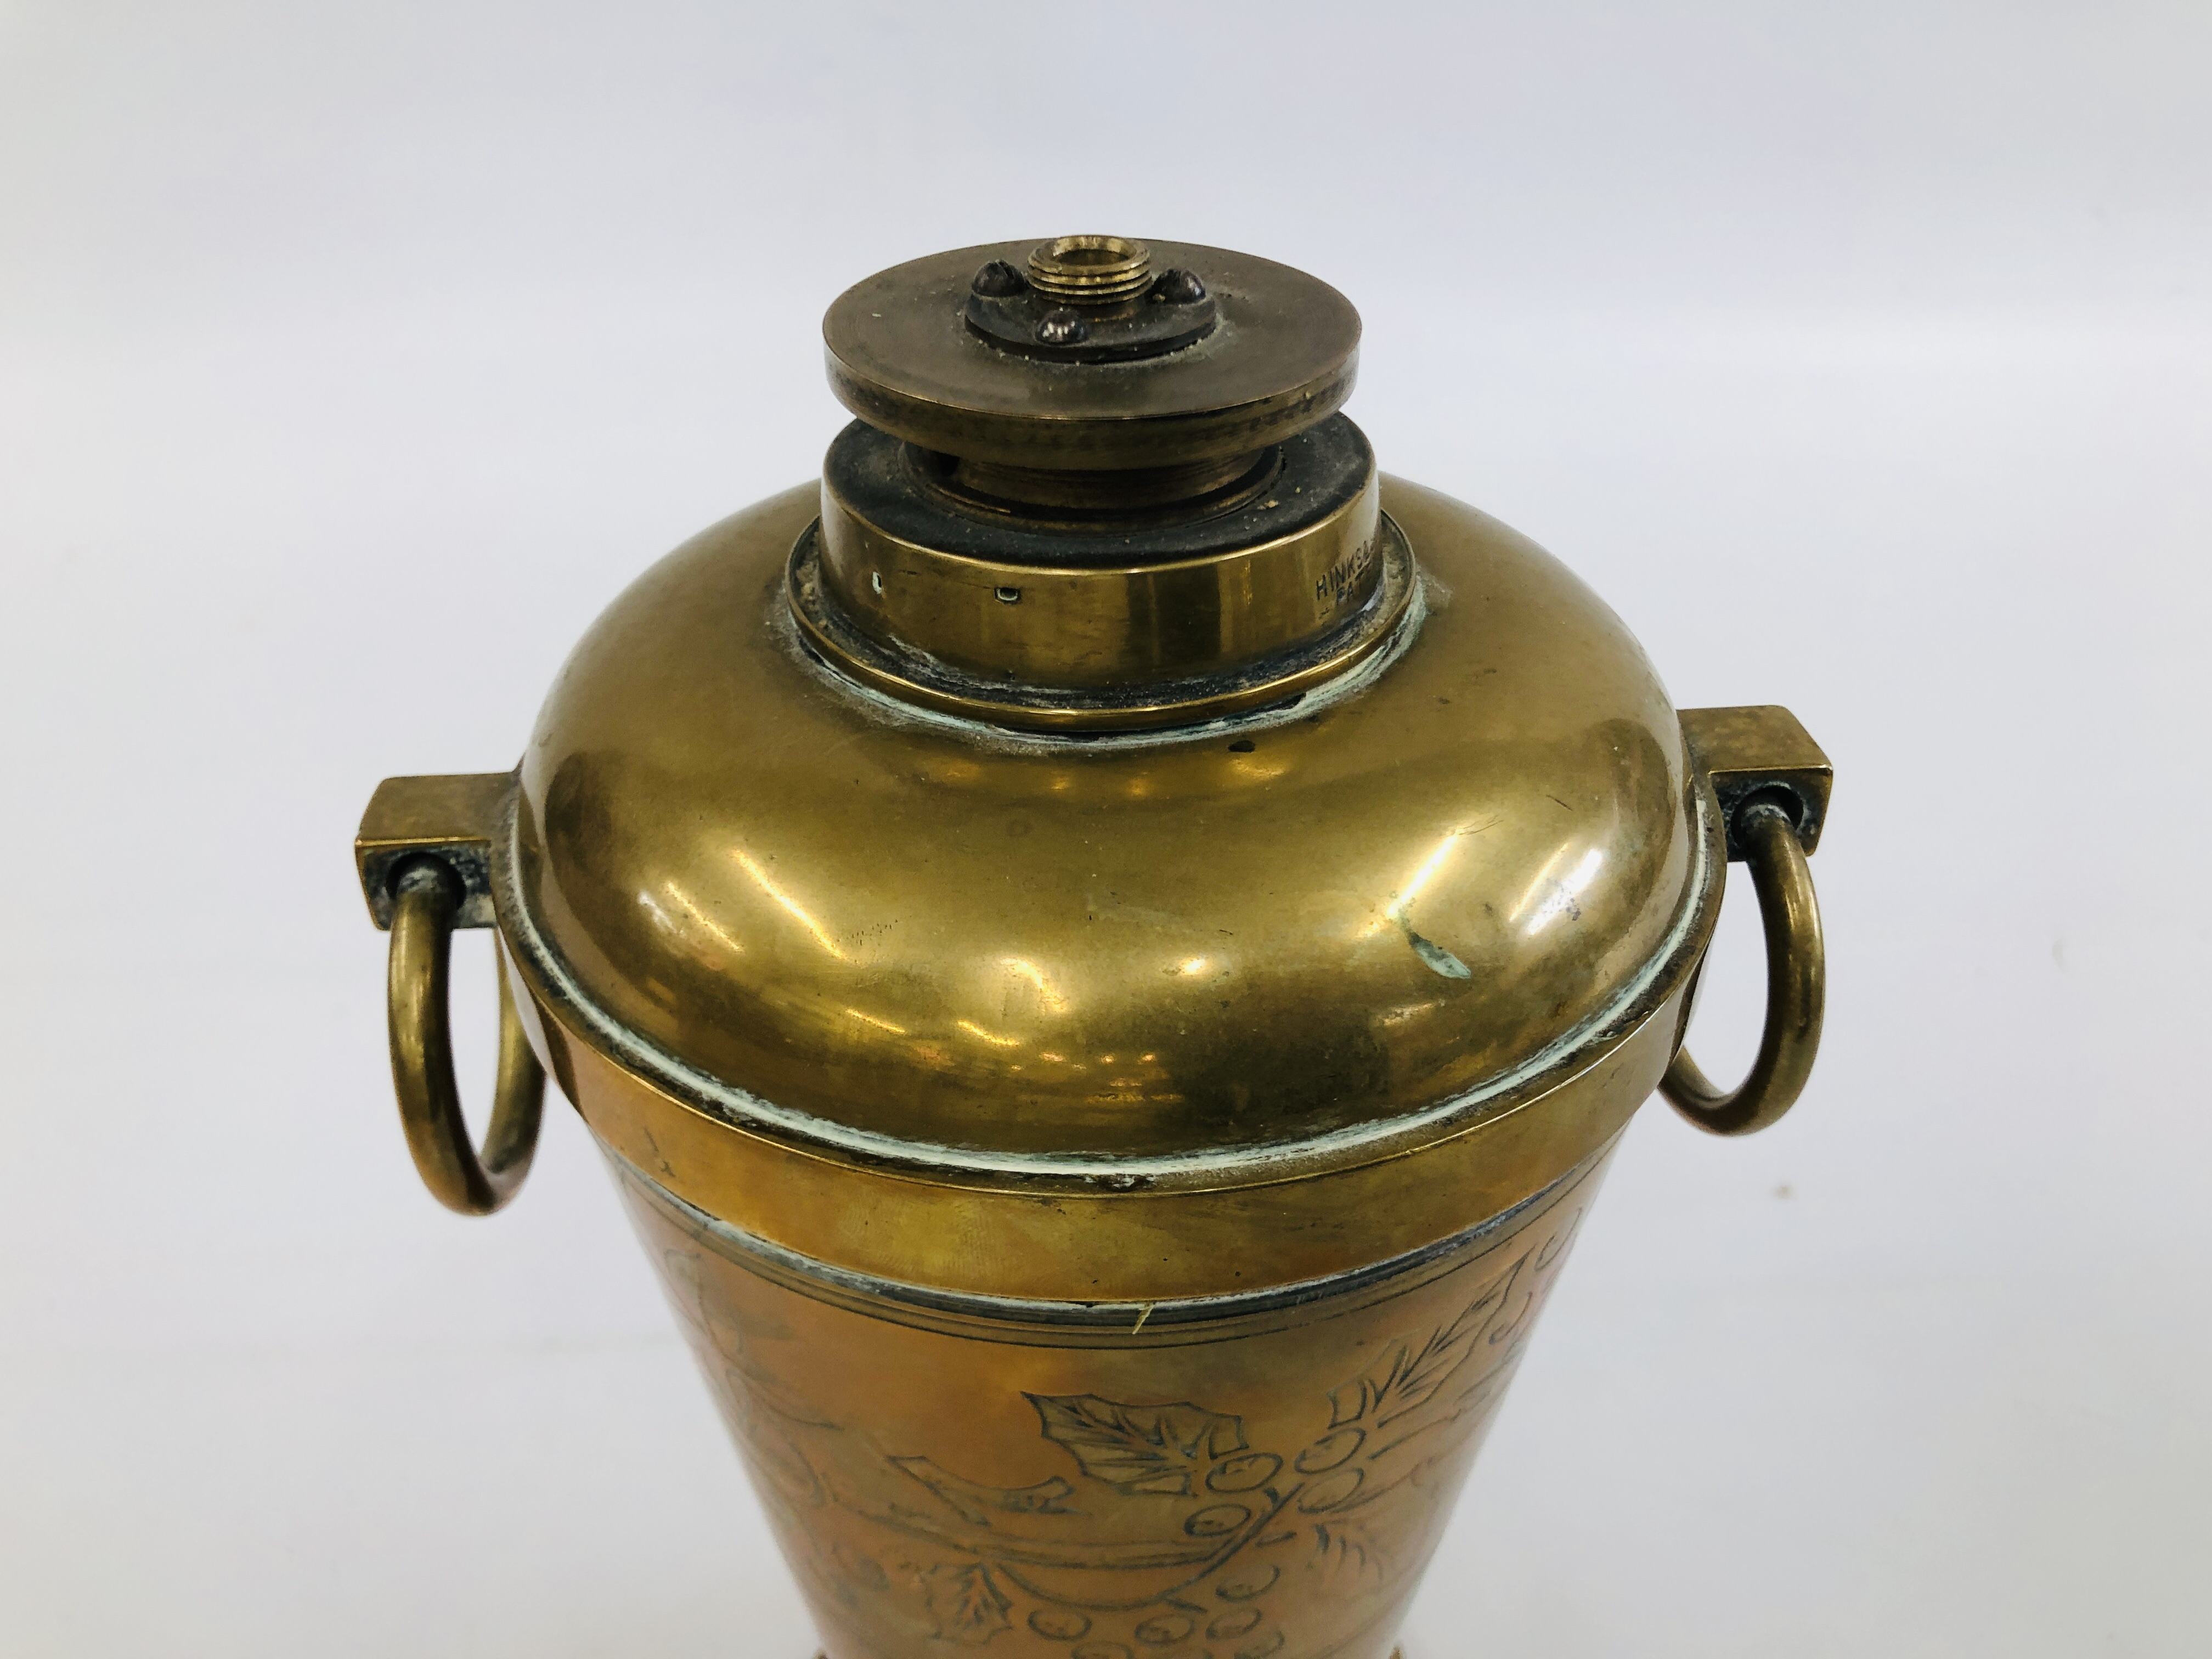 A VINTAGE BRASS OIL LAMP STAMPED WITH ORIGINAL MAKERS MARK "HINKS & SONS" PATENT - H 30CM. - Image 2 of 4